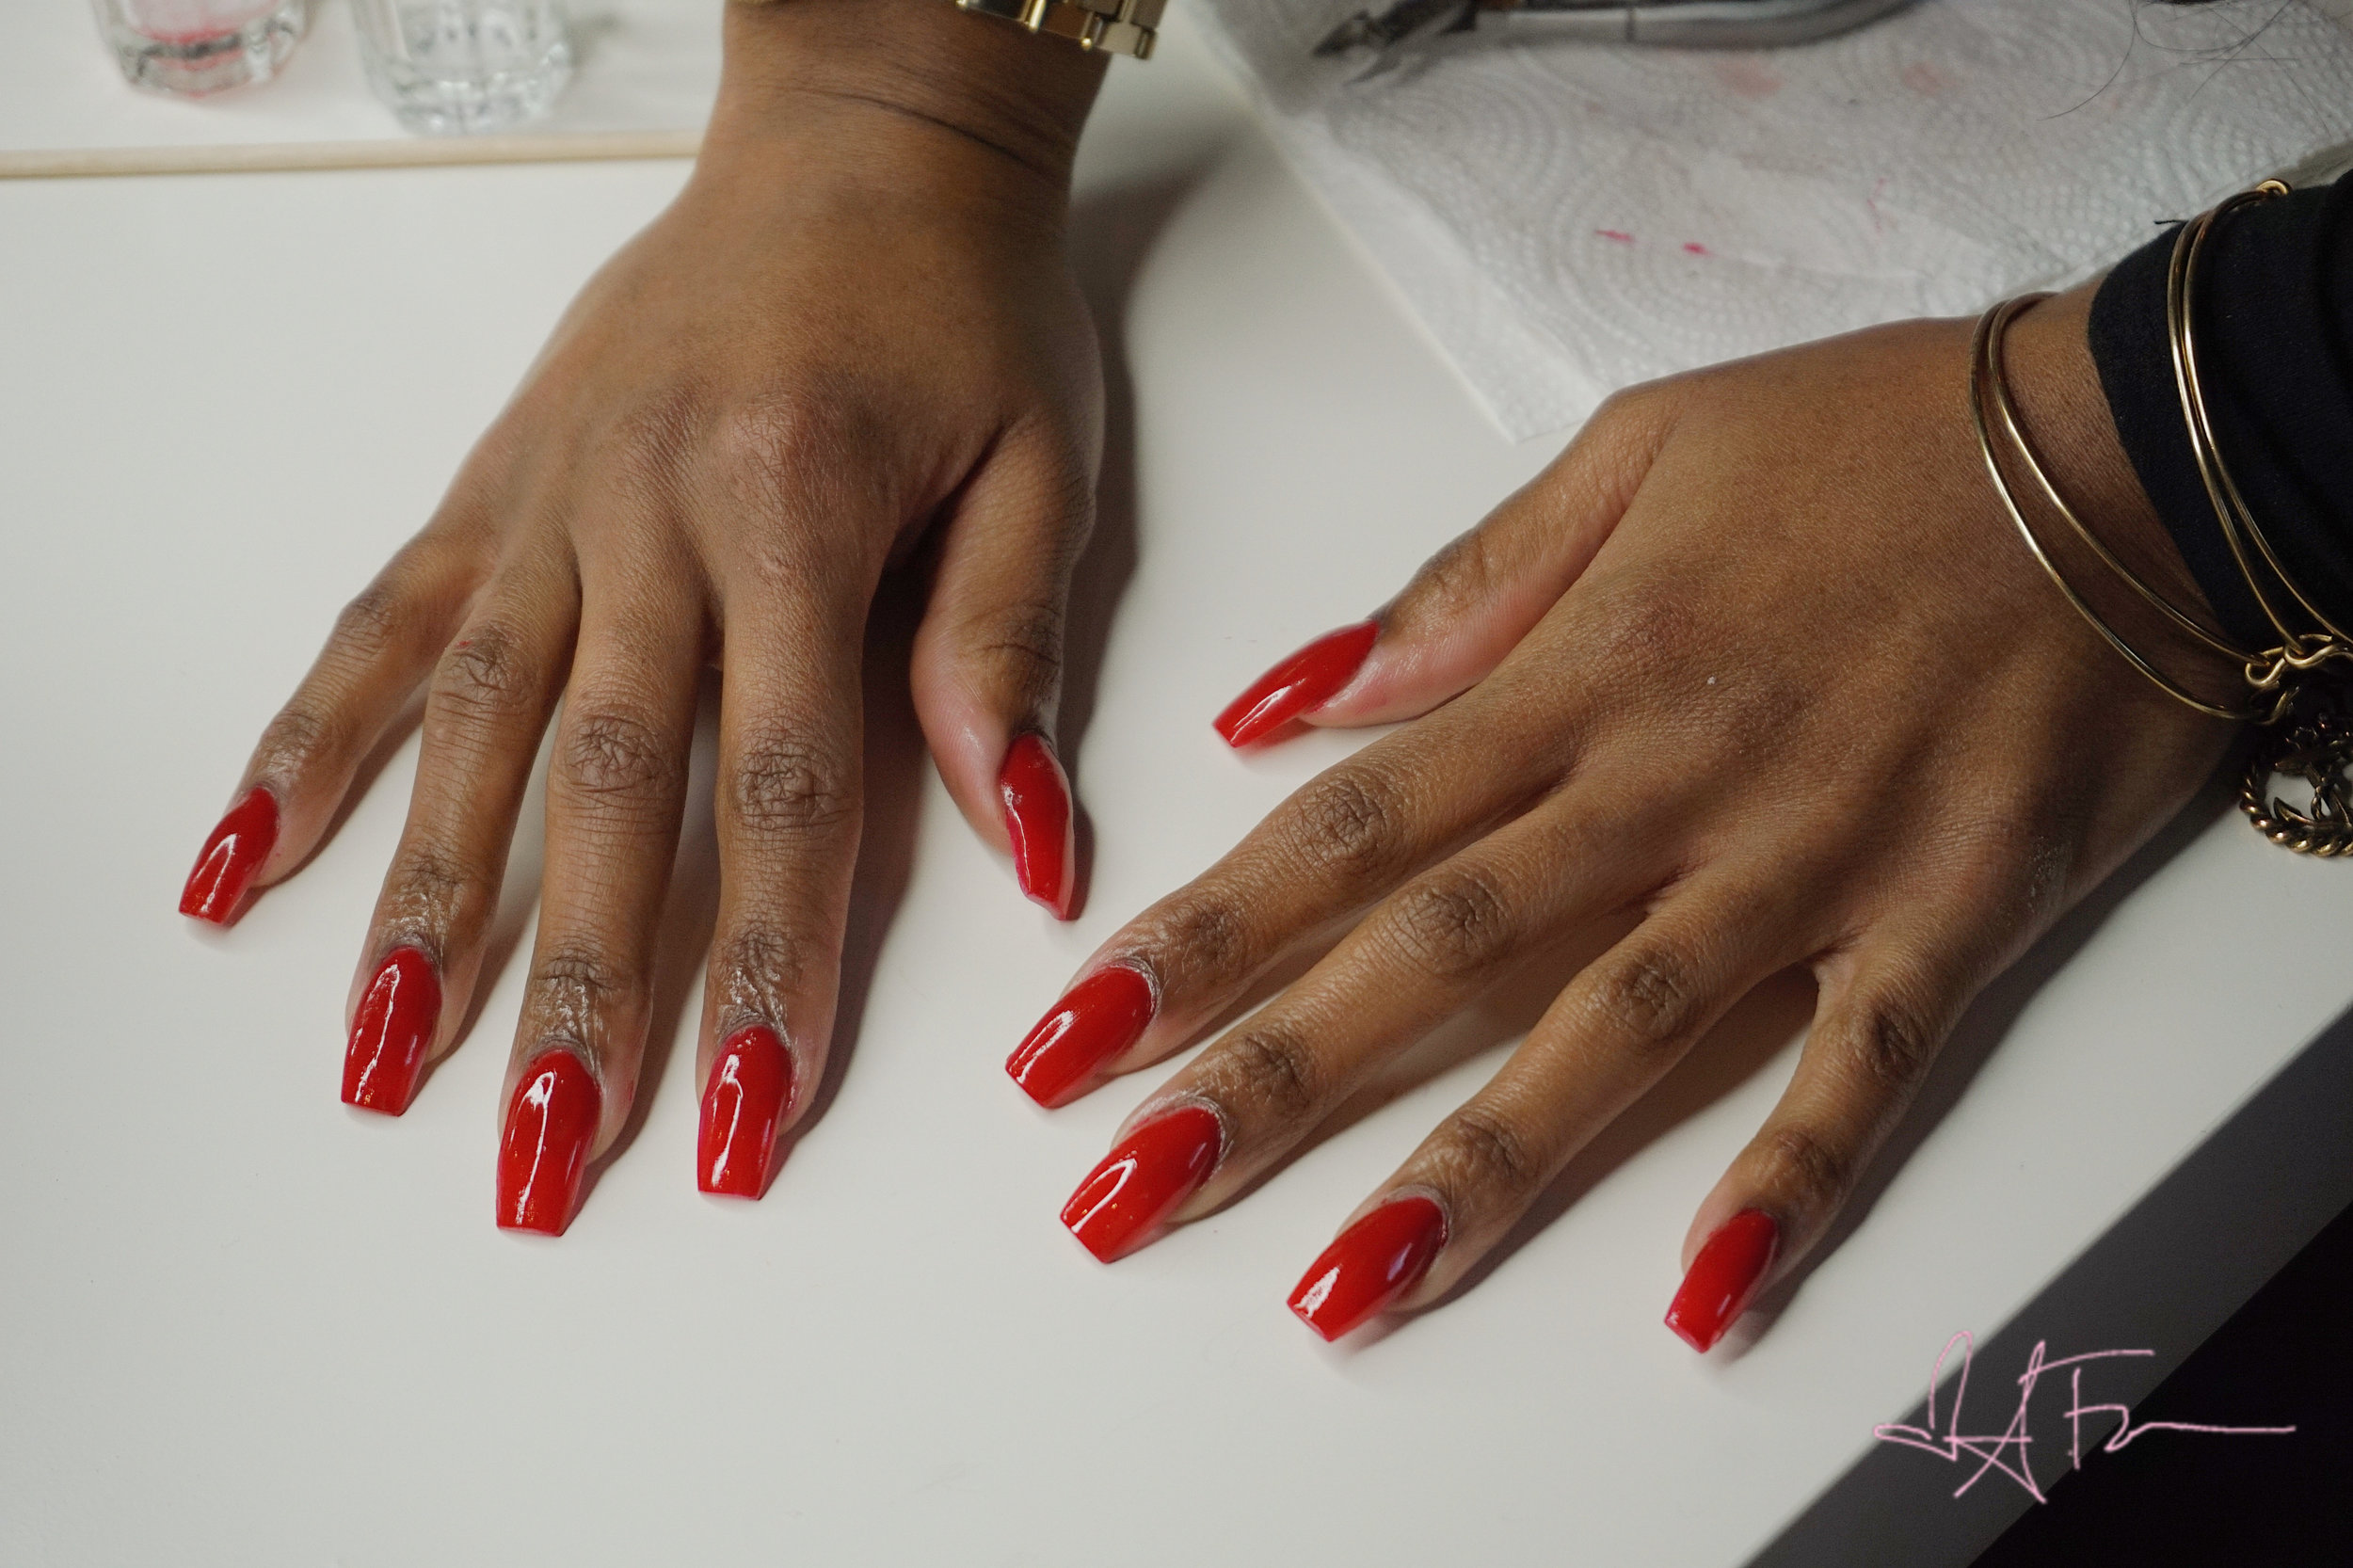 How Much is an Acrylic Fill & How Long Does it Take - Easy Nail Tech